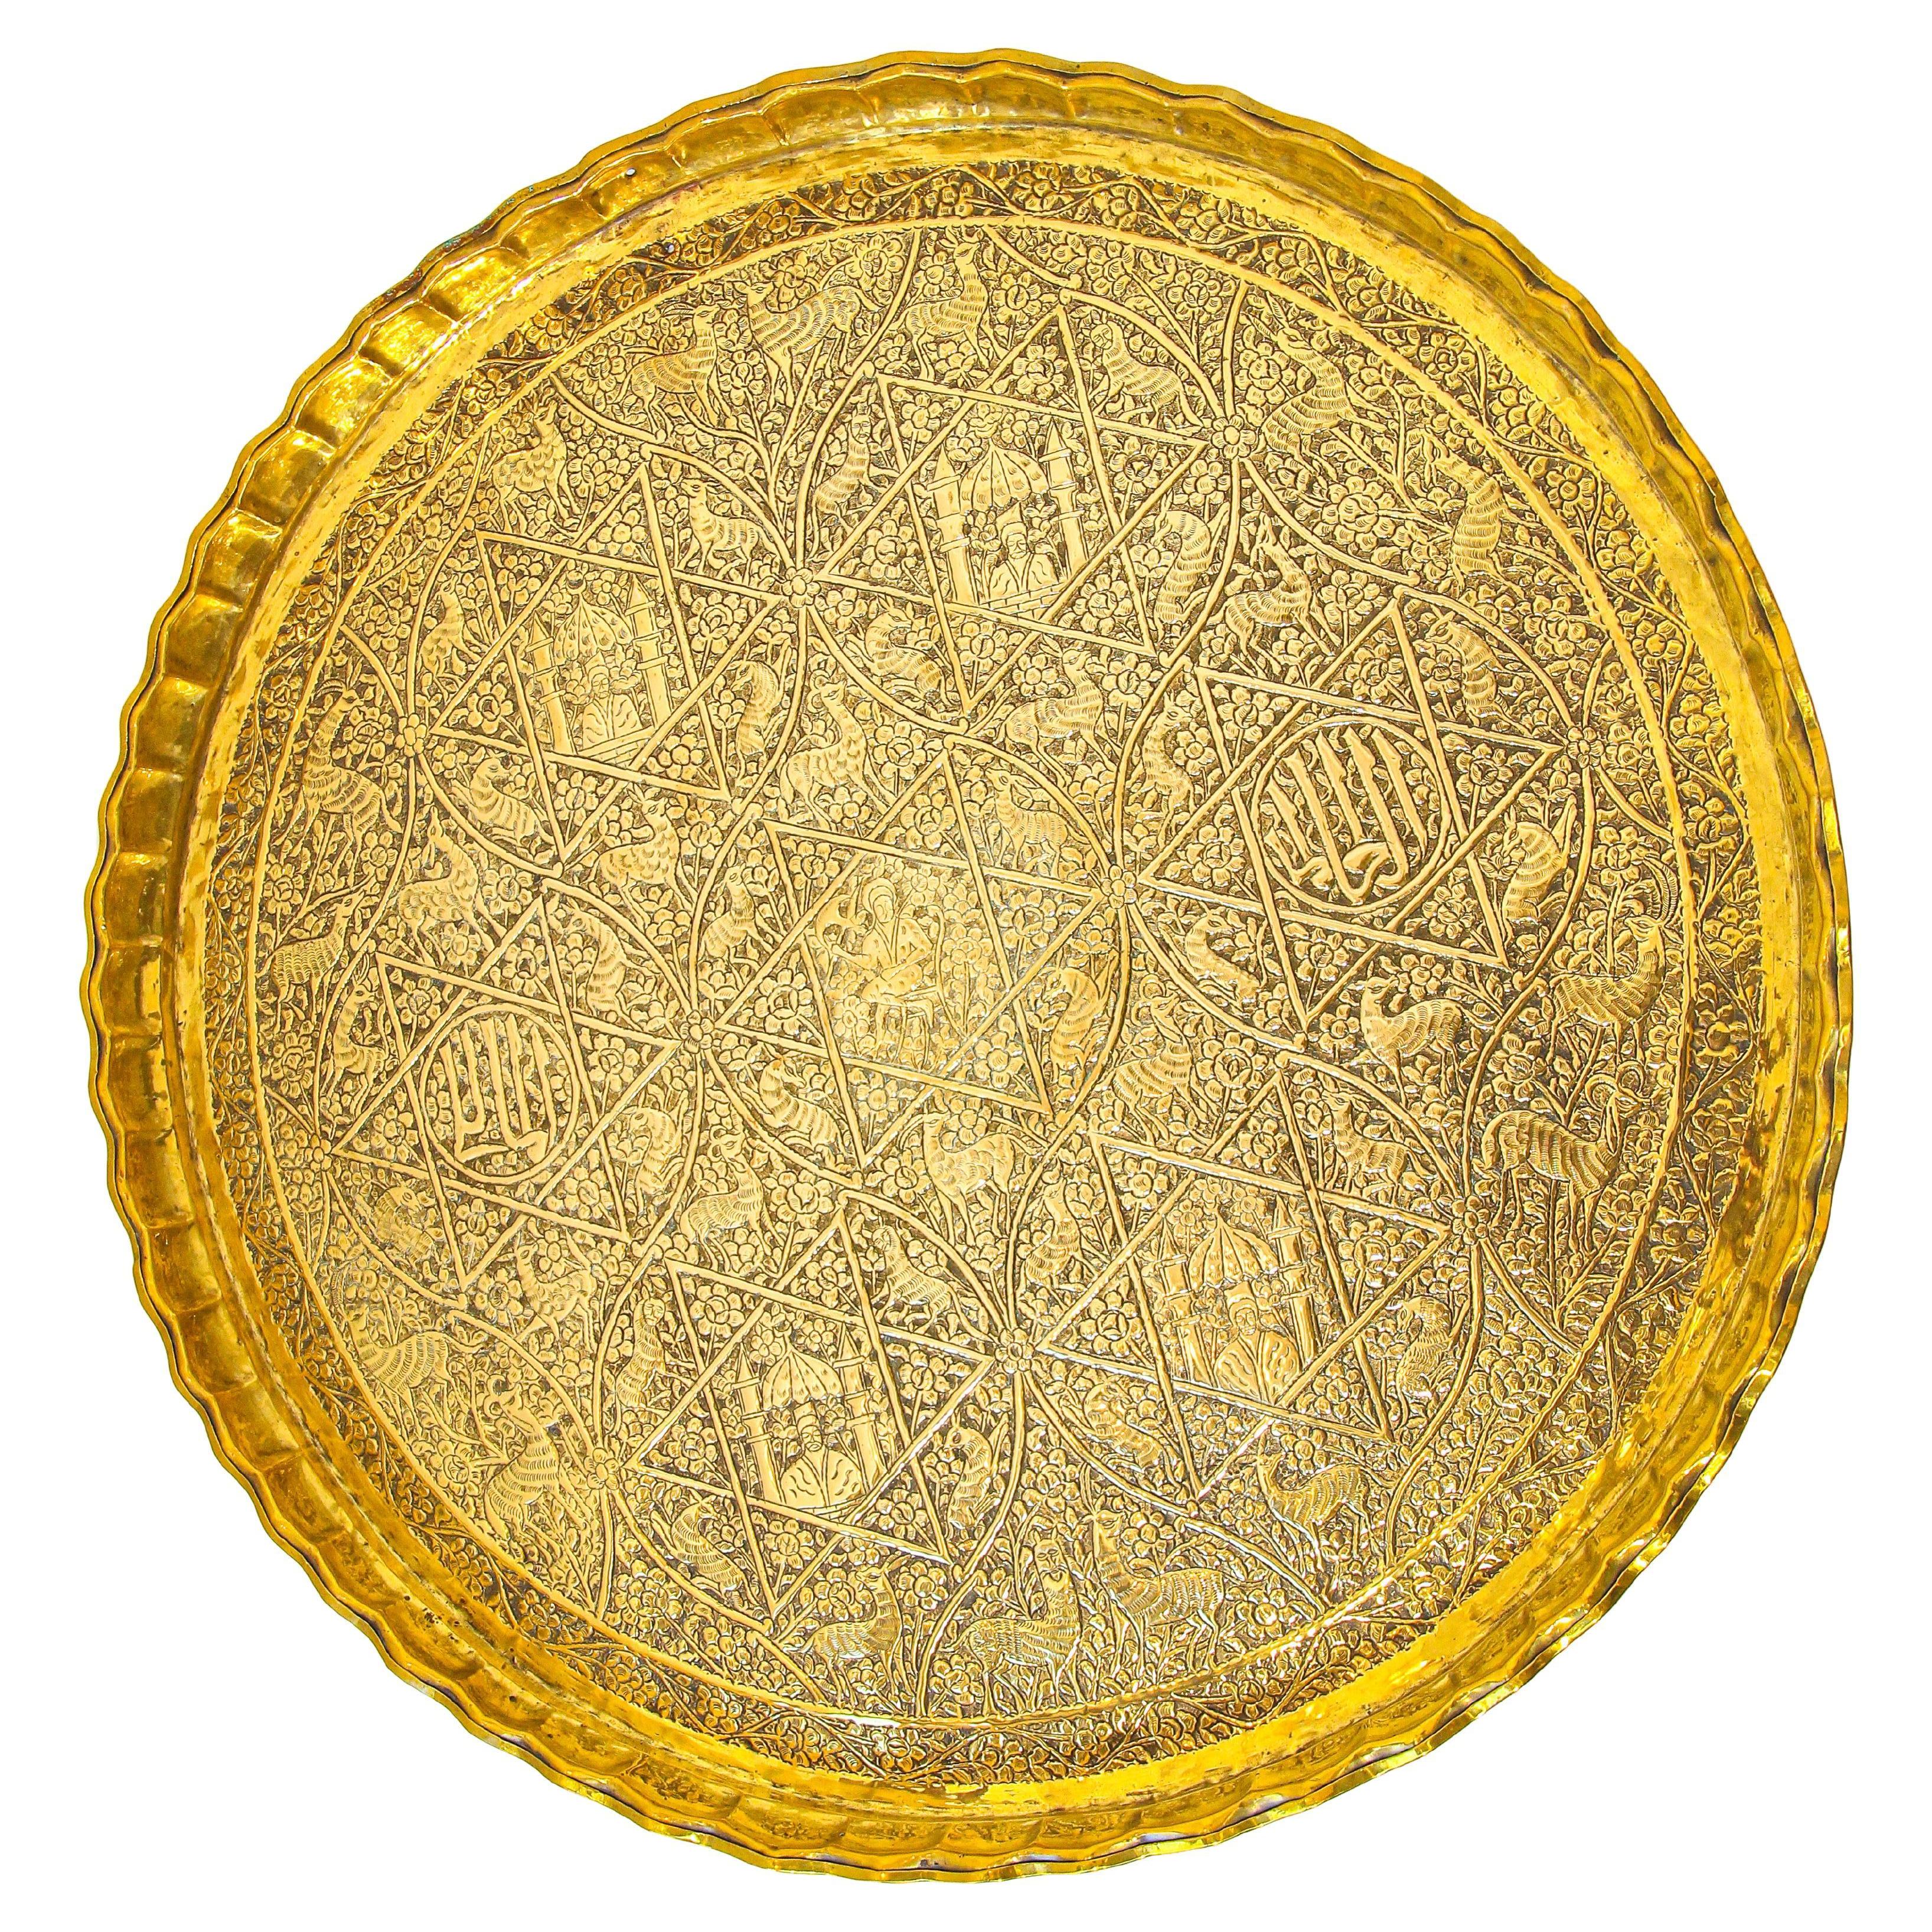 https://a.1stdibscdn.com/large-handcrafted-decorative-indo-persian-mughal-hammered-brass-tray-for-sale/f_9068/f_25541152/f_25541152_1636594787978_1684418017739_master.jpg